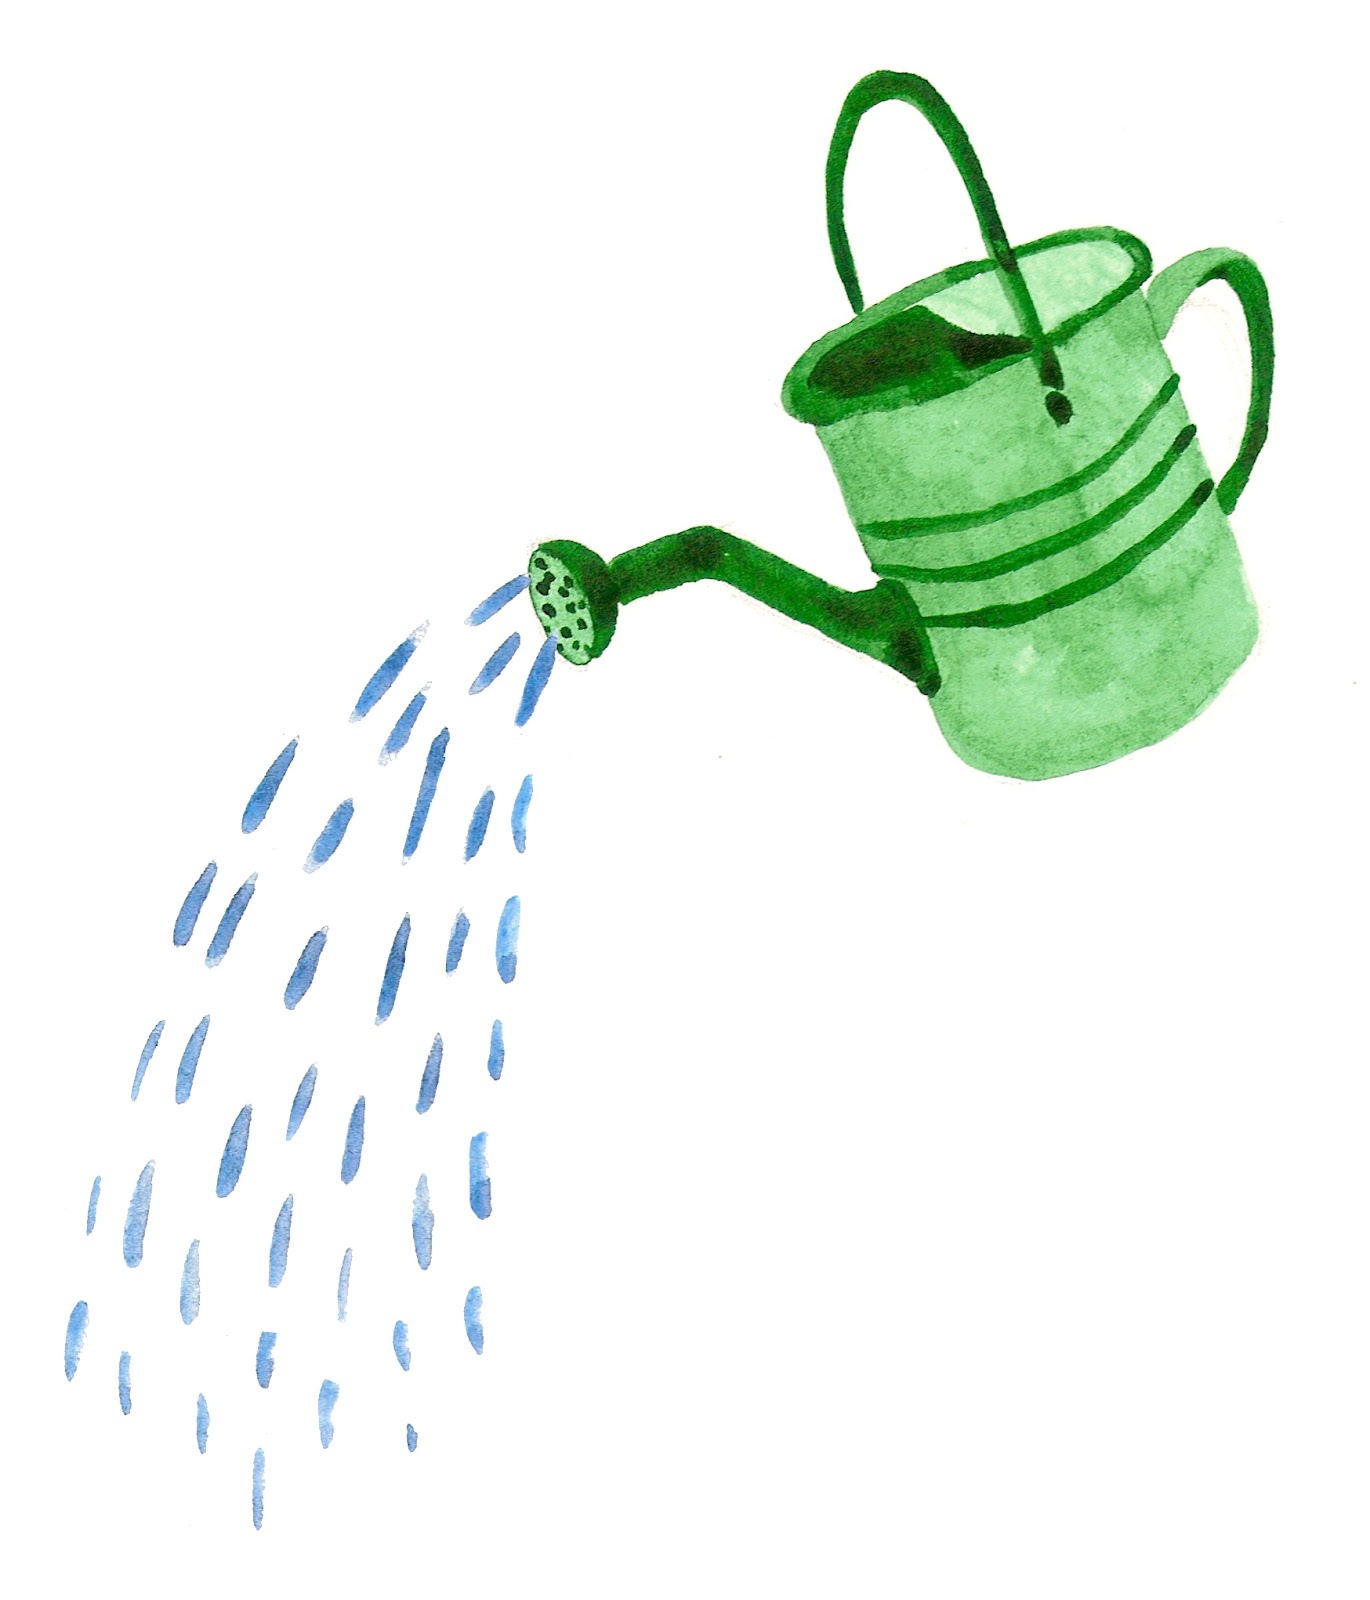 Watering can illustration clipart 3